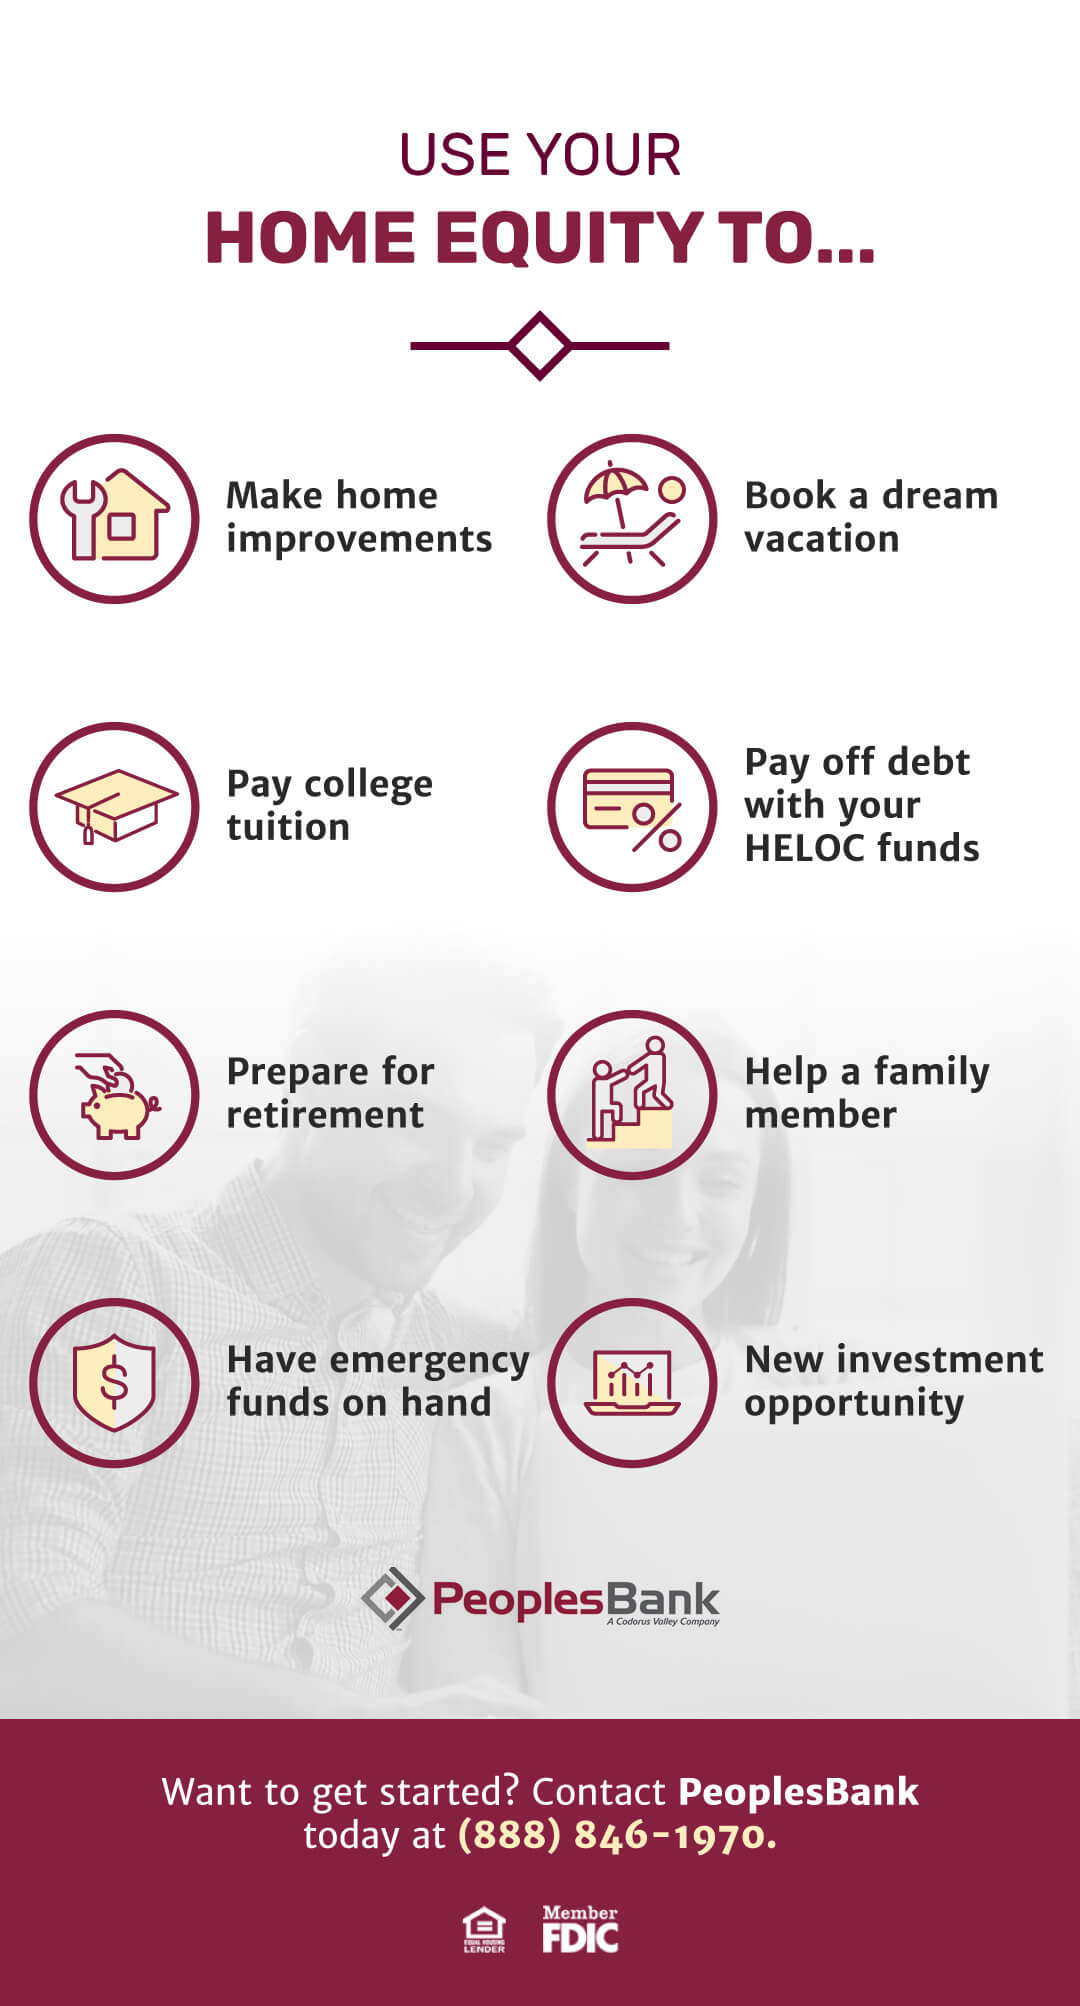 There are a variety of ways to use your home equity. Want to get started? Contact PeoplesBank today at 888-846-1970.